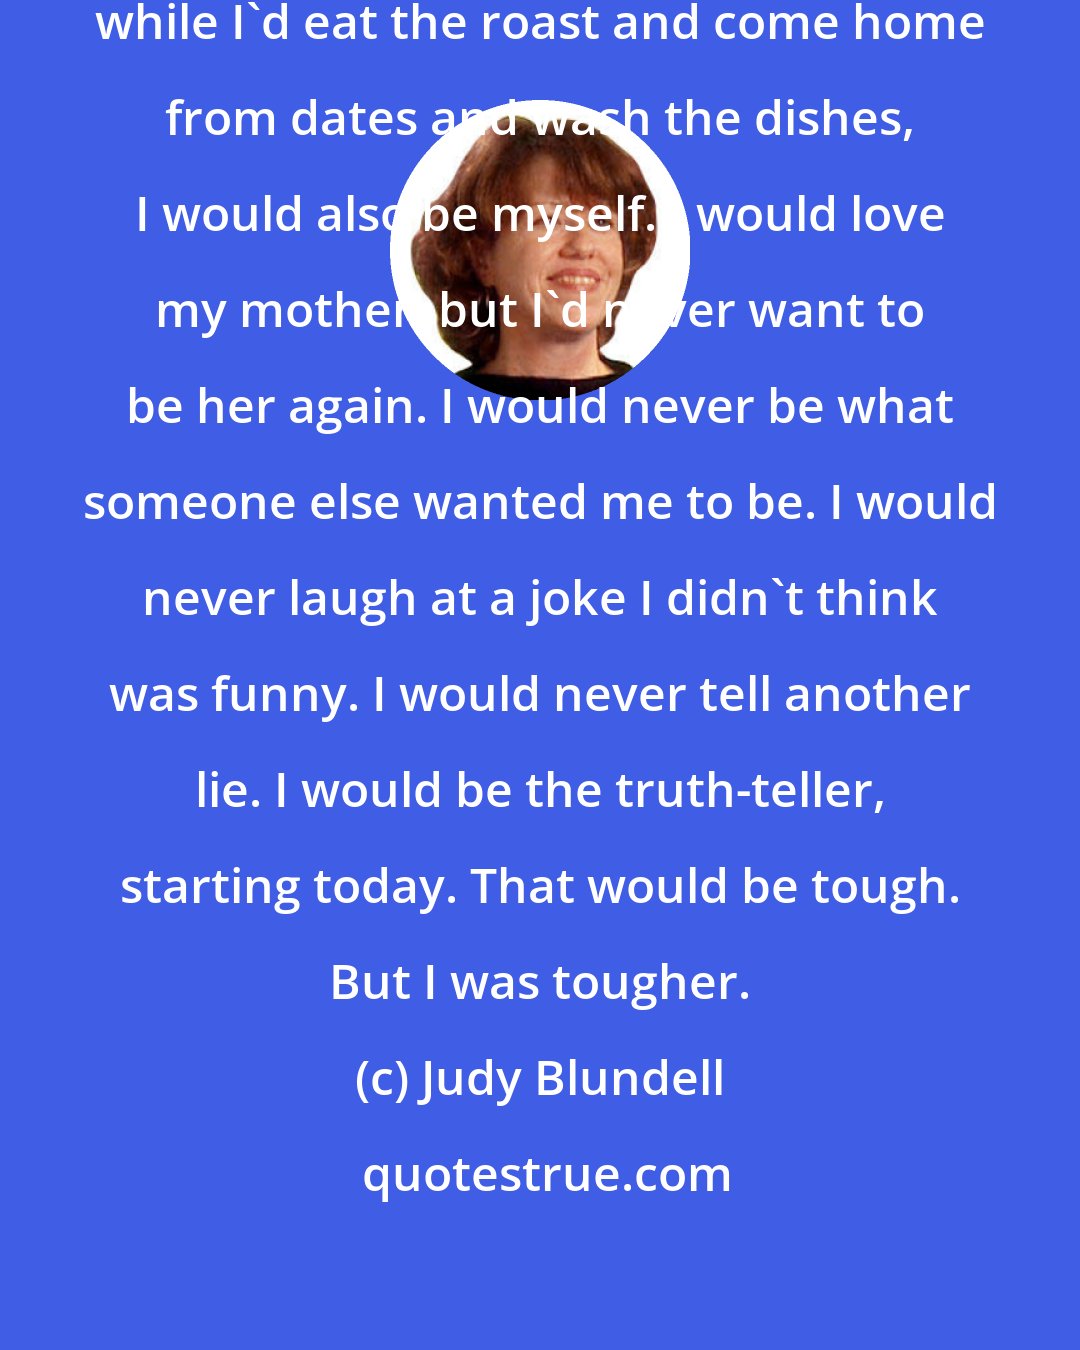 Judy Blundell: But while I'd be their daughter, while I'd eat the roast and come home from dates and wash the dishes, I would also be myself. I would love my mother, but I'd never want to be her again. I would never be what someone else wanted me to be. I would never laugh at a joke I didn't think was funny. I would never tell another lie. I would be the truth-teller, starting today. That would be tough. But I was tougher.